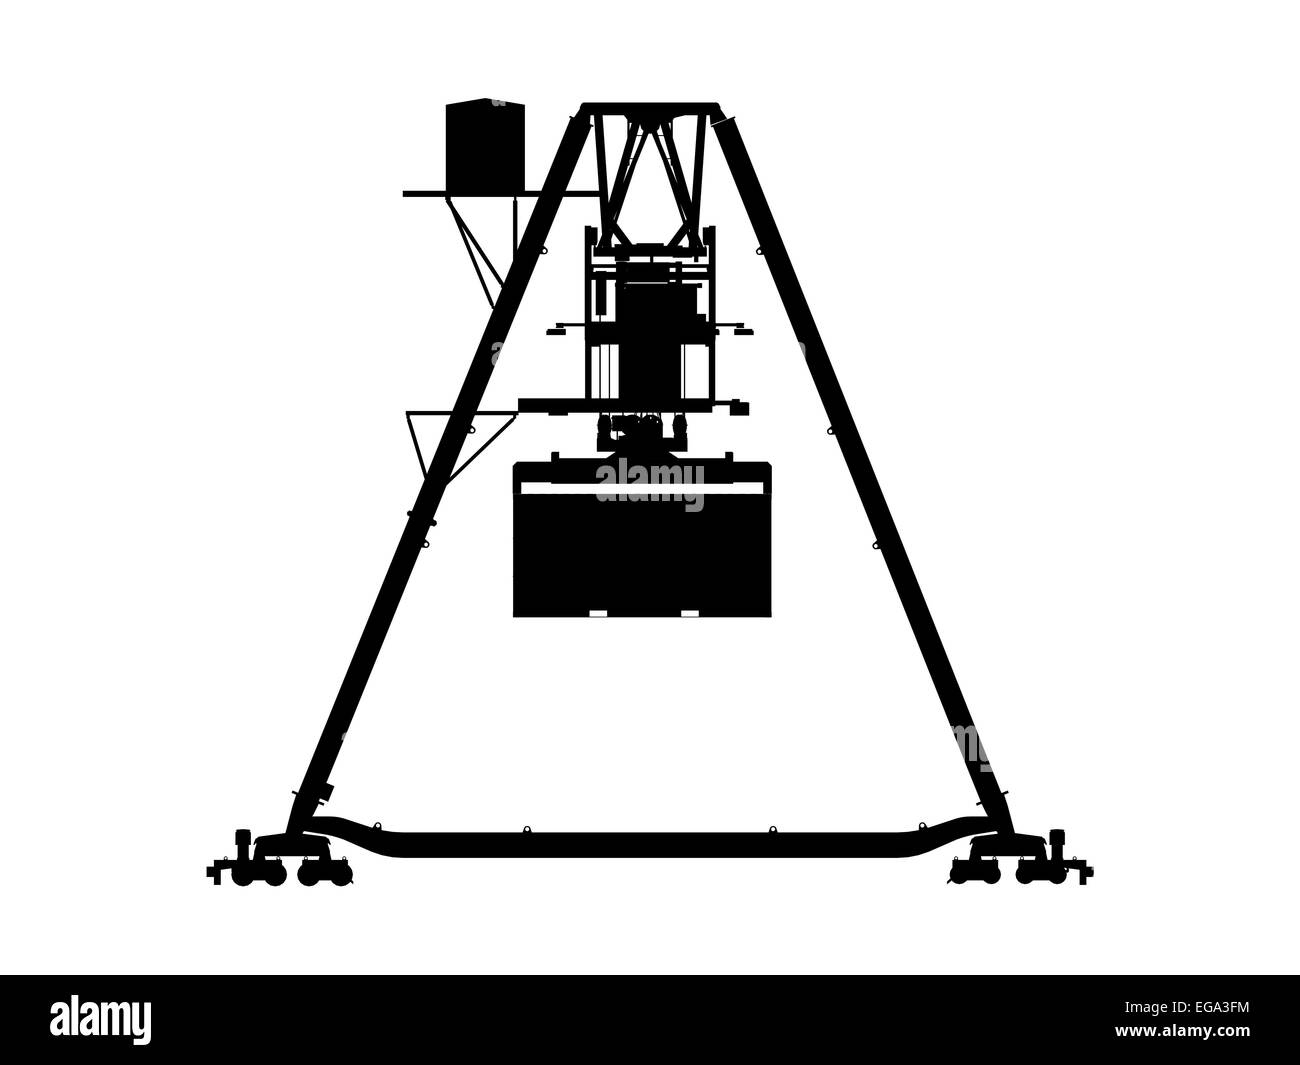 Container bridge gantry crane. Black silhouette isolated on white background. Render of 3d model, side view Stock Photo